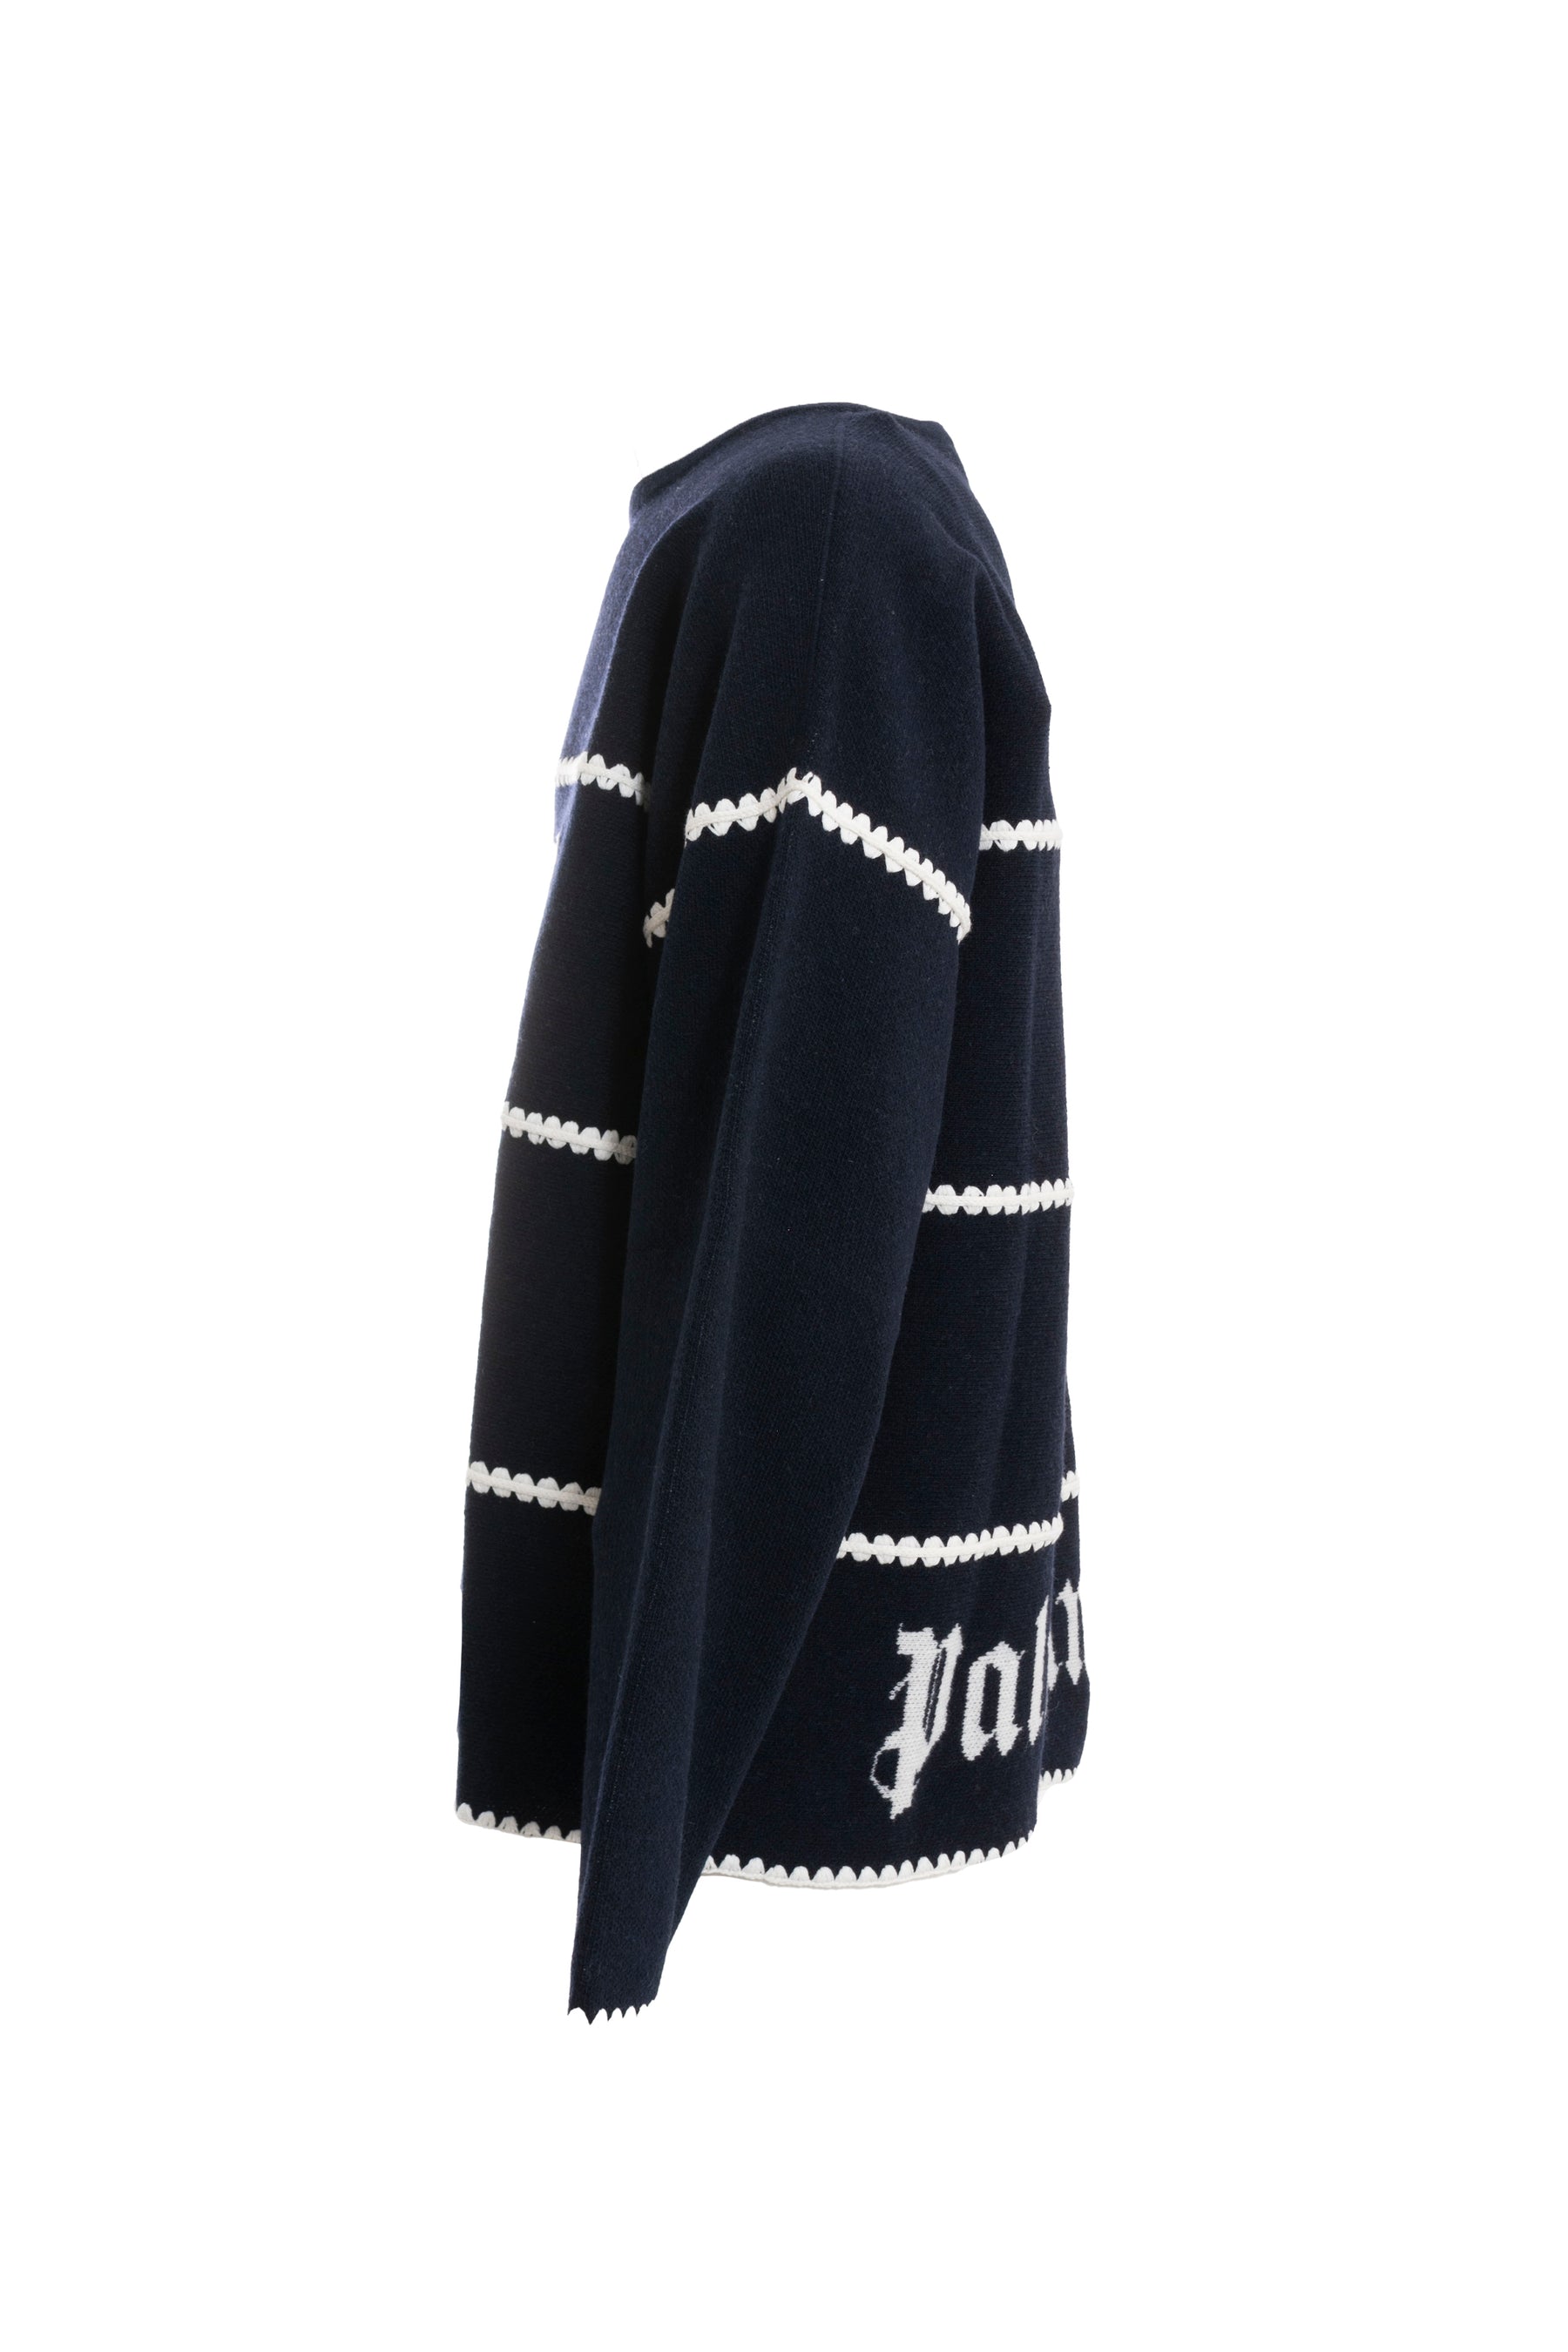 PA MONOGRAM STRIPED SWEATER / NAVY BLUE OFFWHT